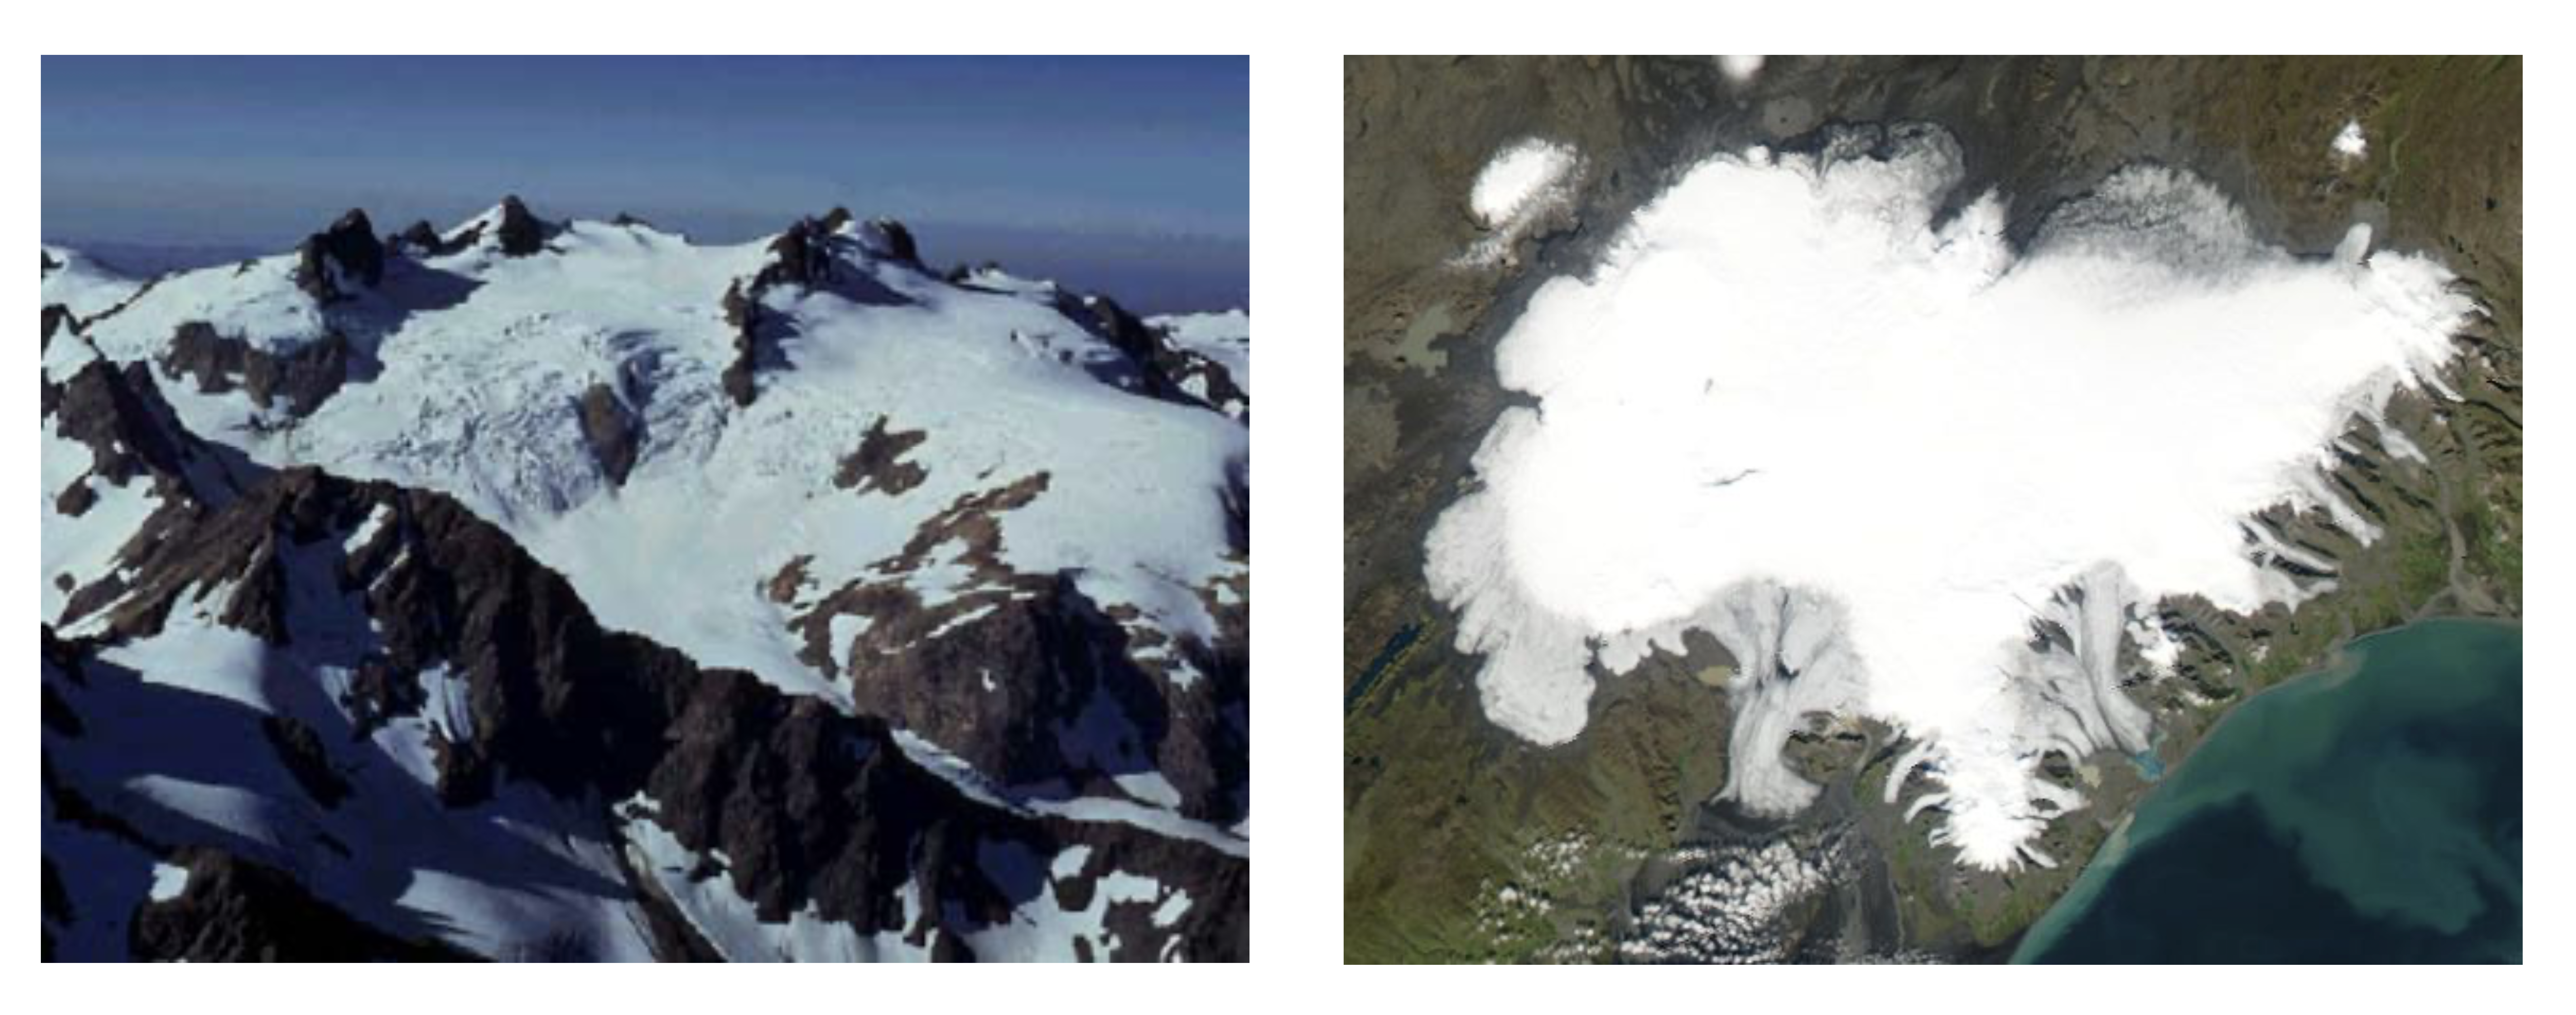 Left: side profile of mountain. Right: ariel view of mountain. Both pictures have white snow on the very top of the mountain.